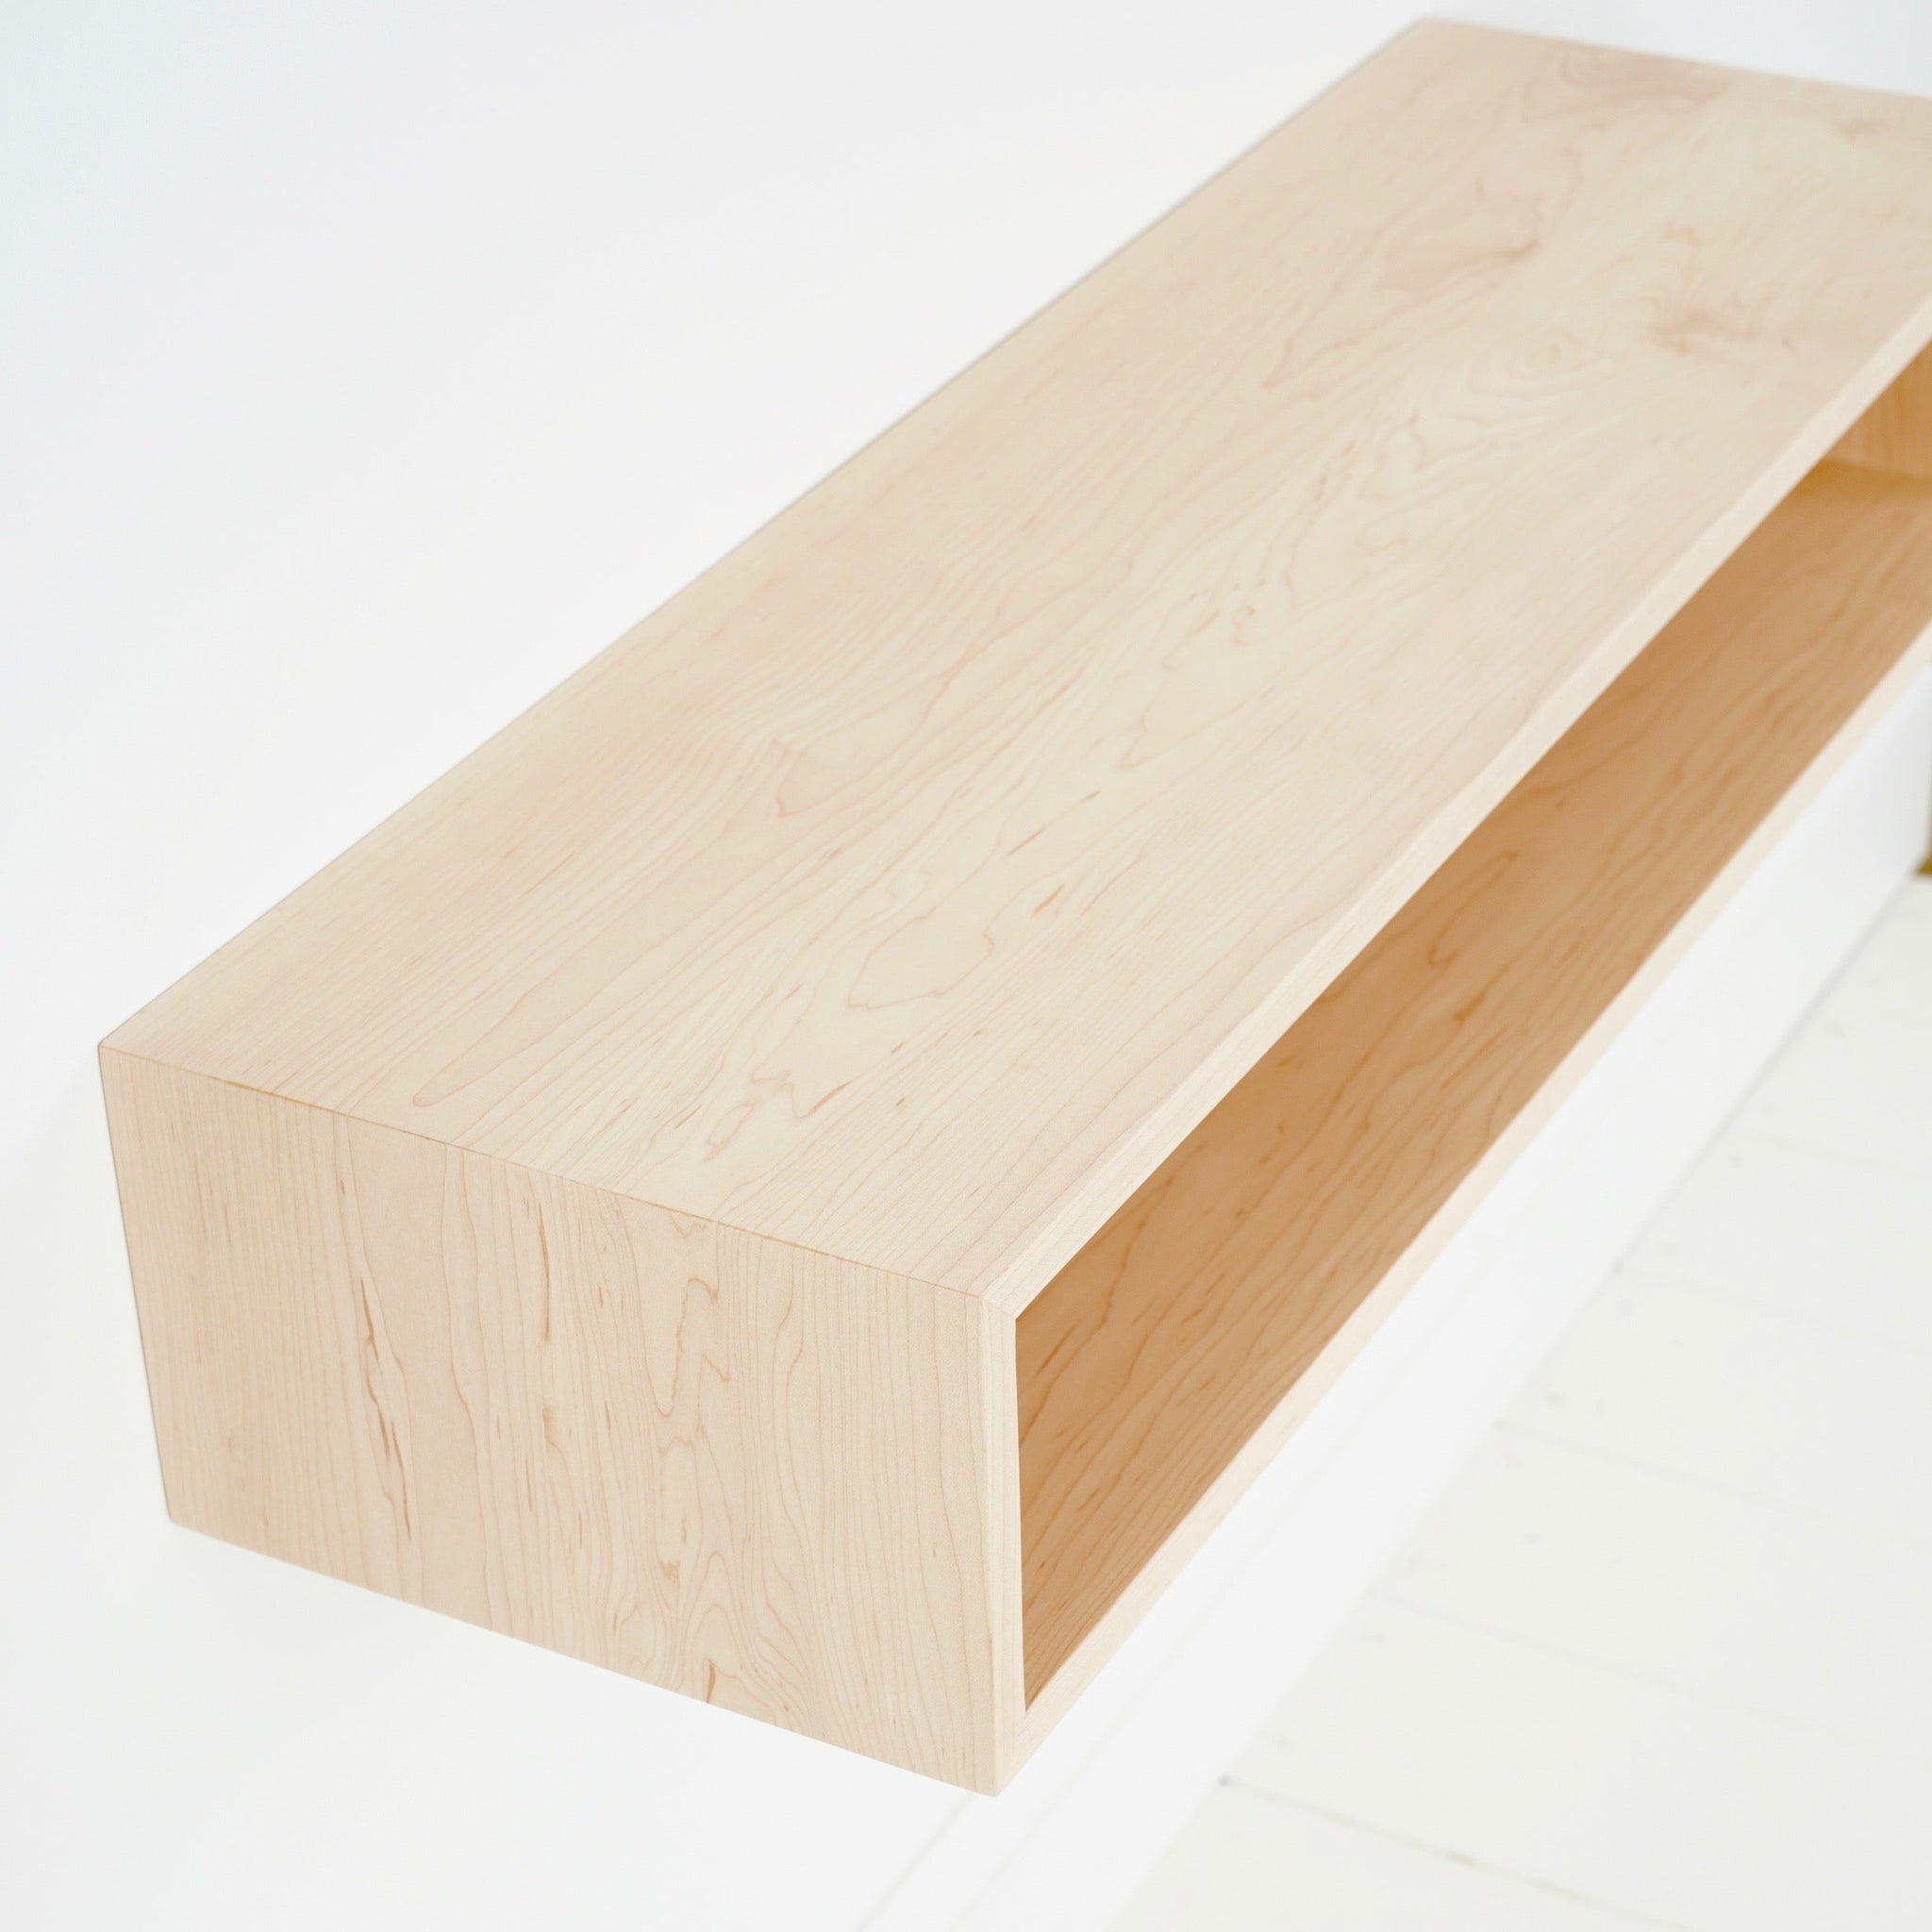 Floating Console Table in Solid Maple - Krøvel Furniture Co. Handmade in Maine